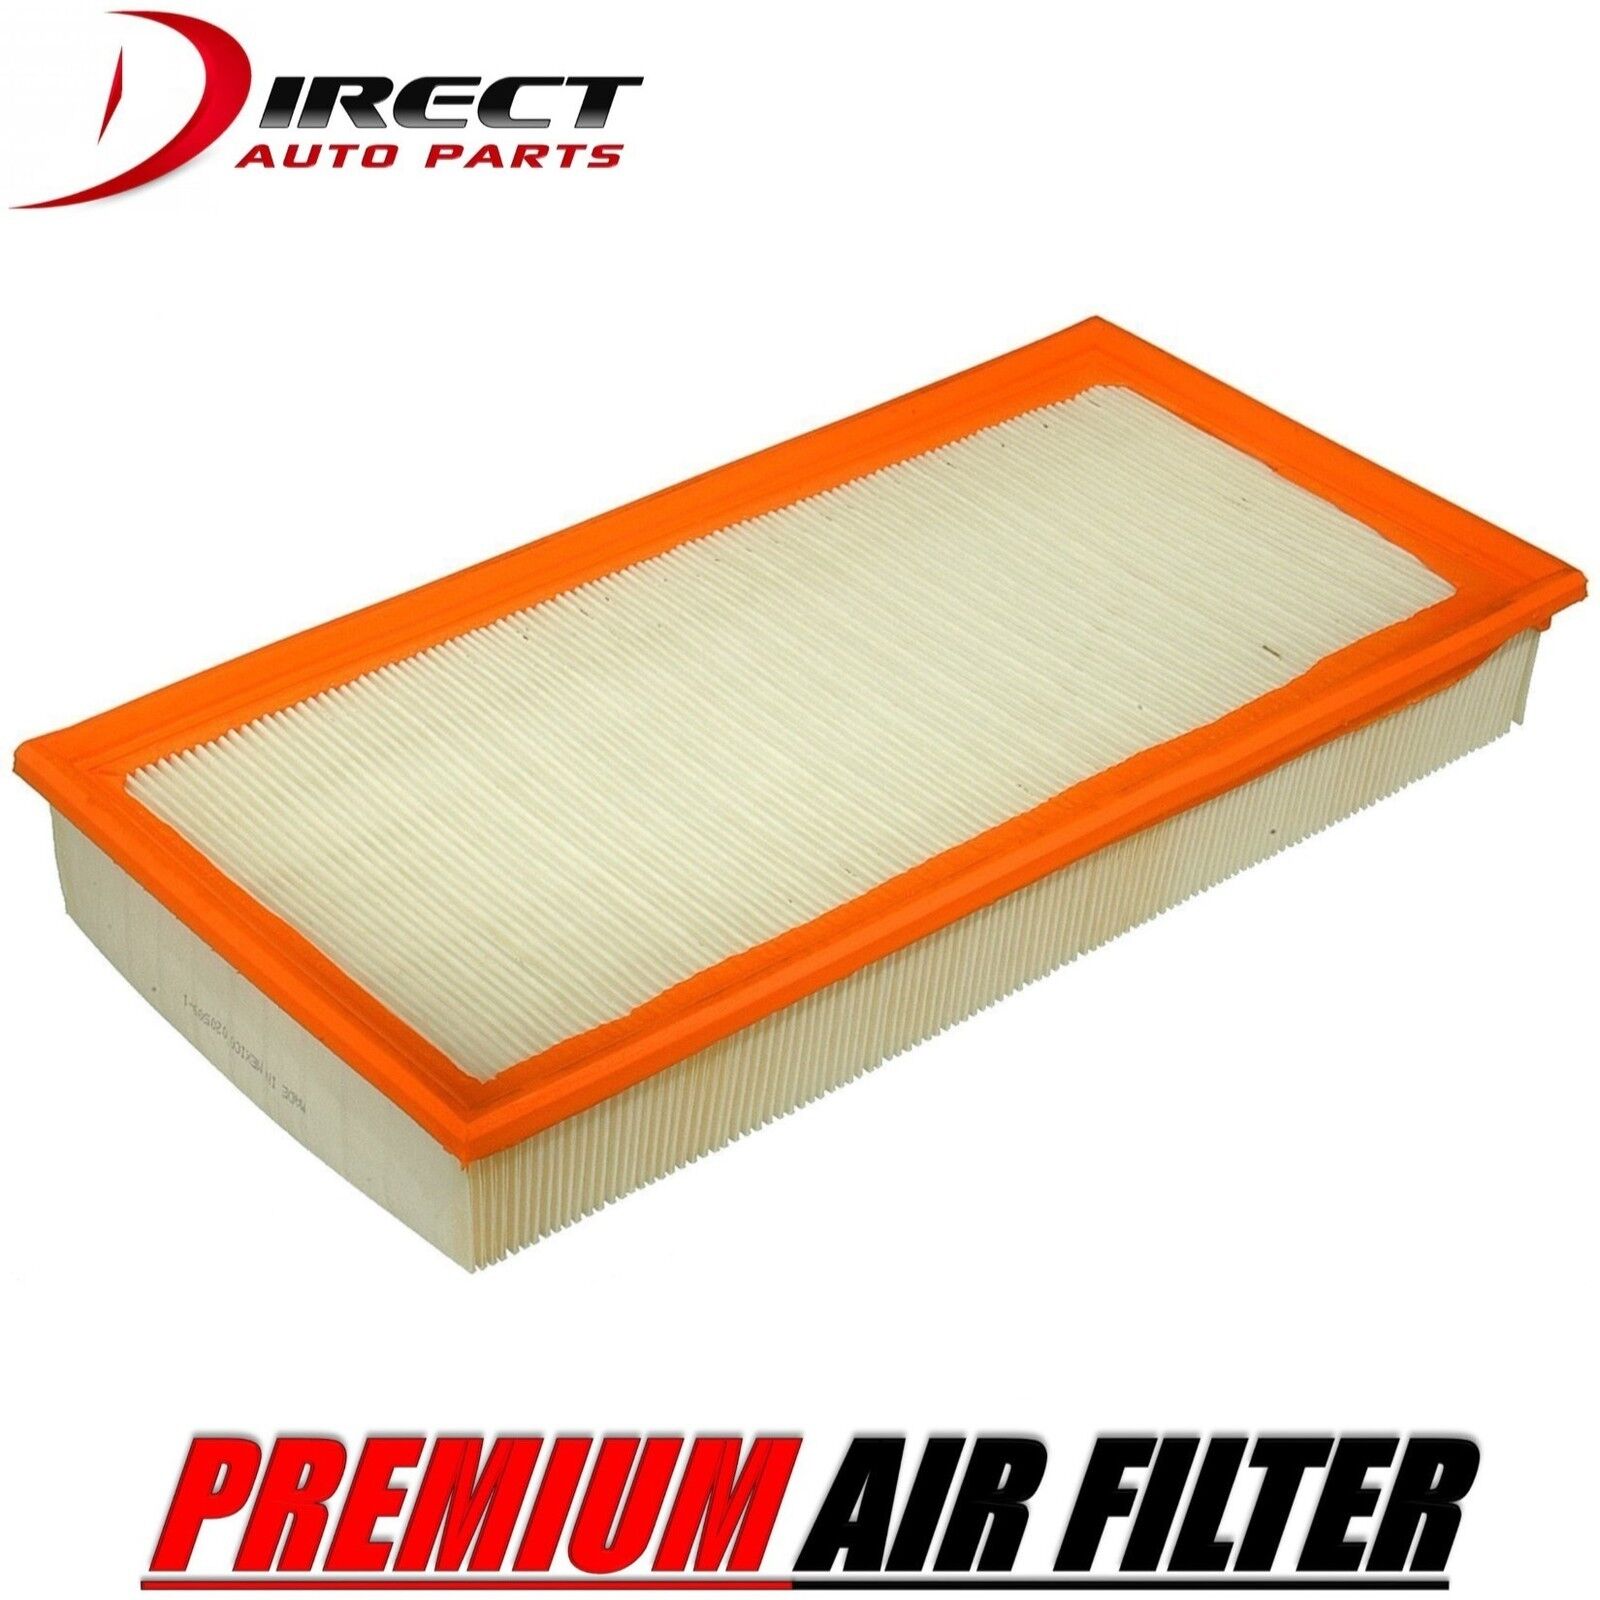 FORD AIR FILTER FOR FORD EXPLORER 3.5L ENGINE 2011 - 2016